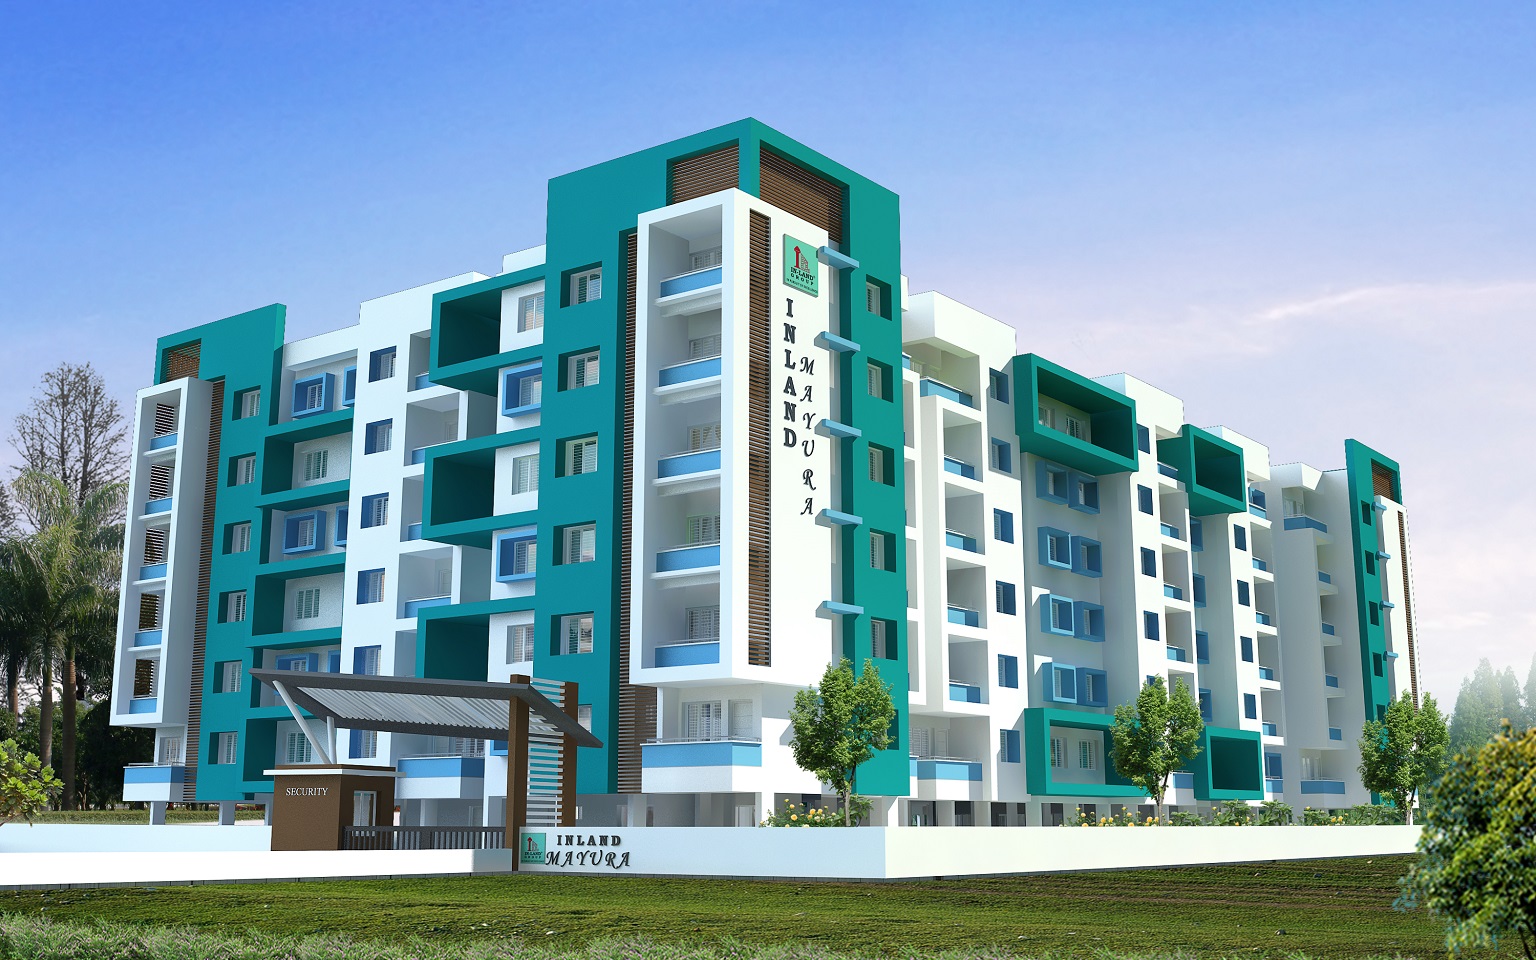 Inland Mayura Residential Flats Project in Mangalore